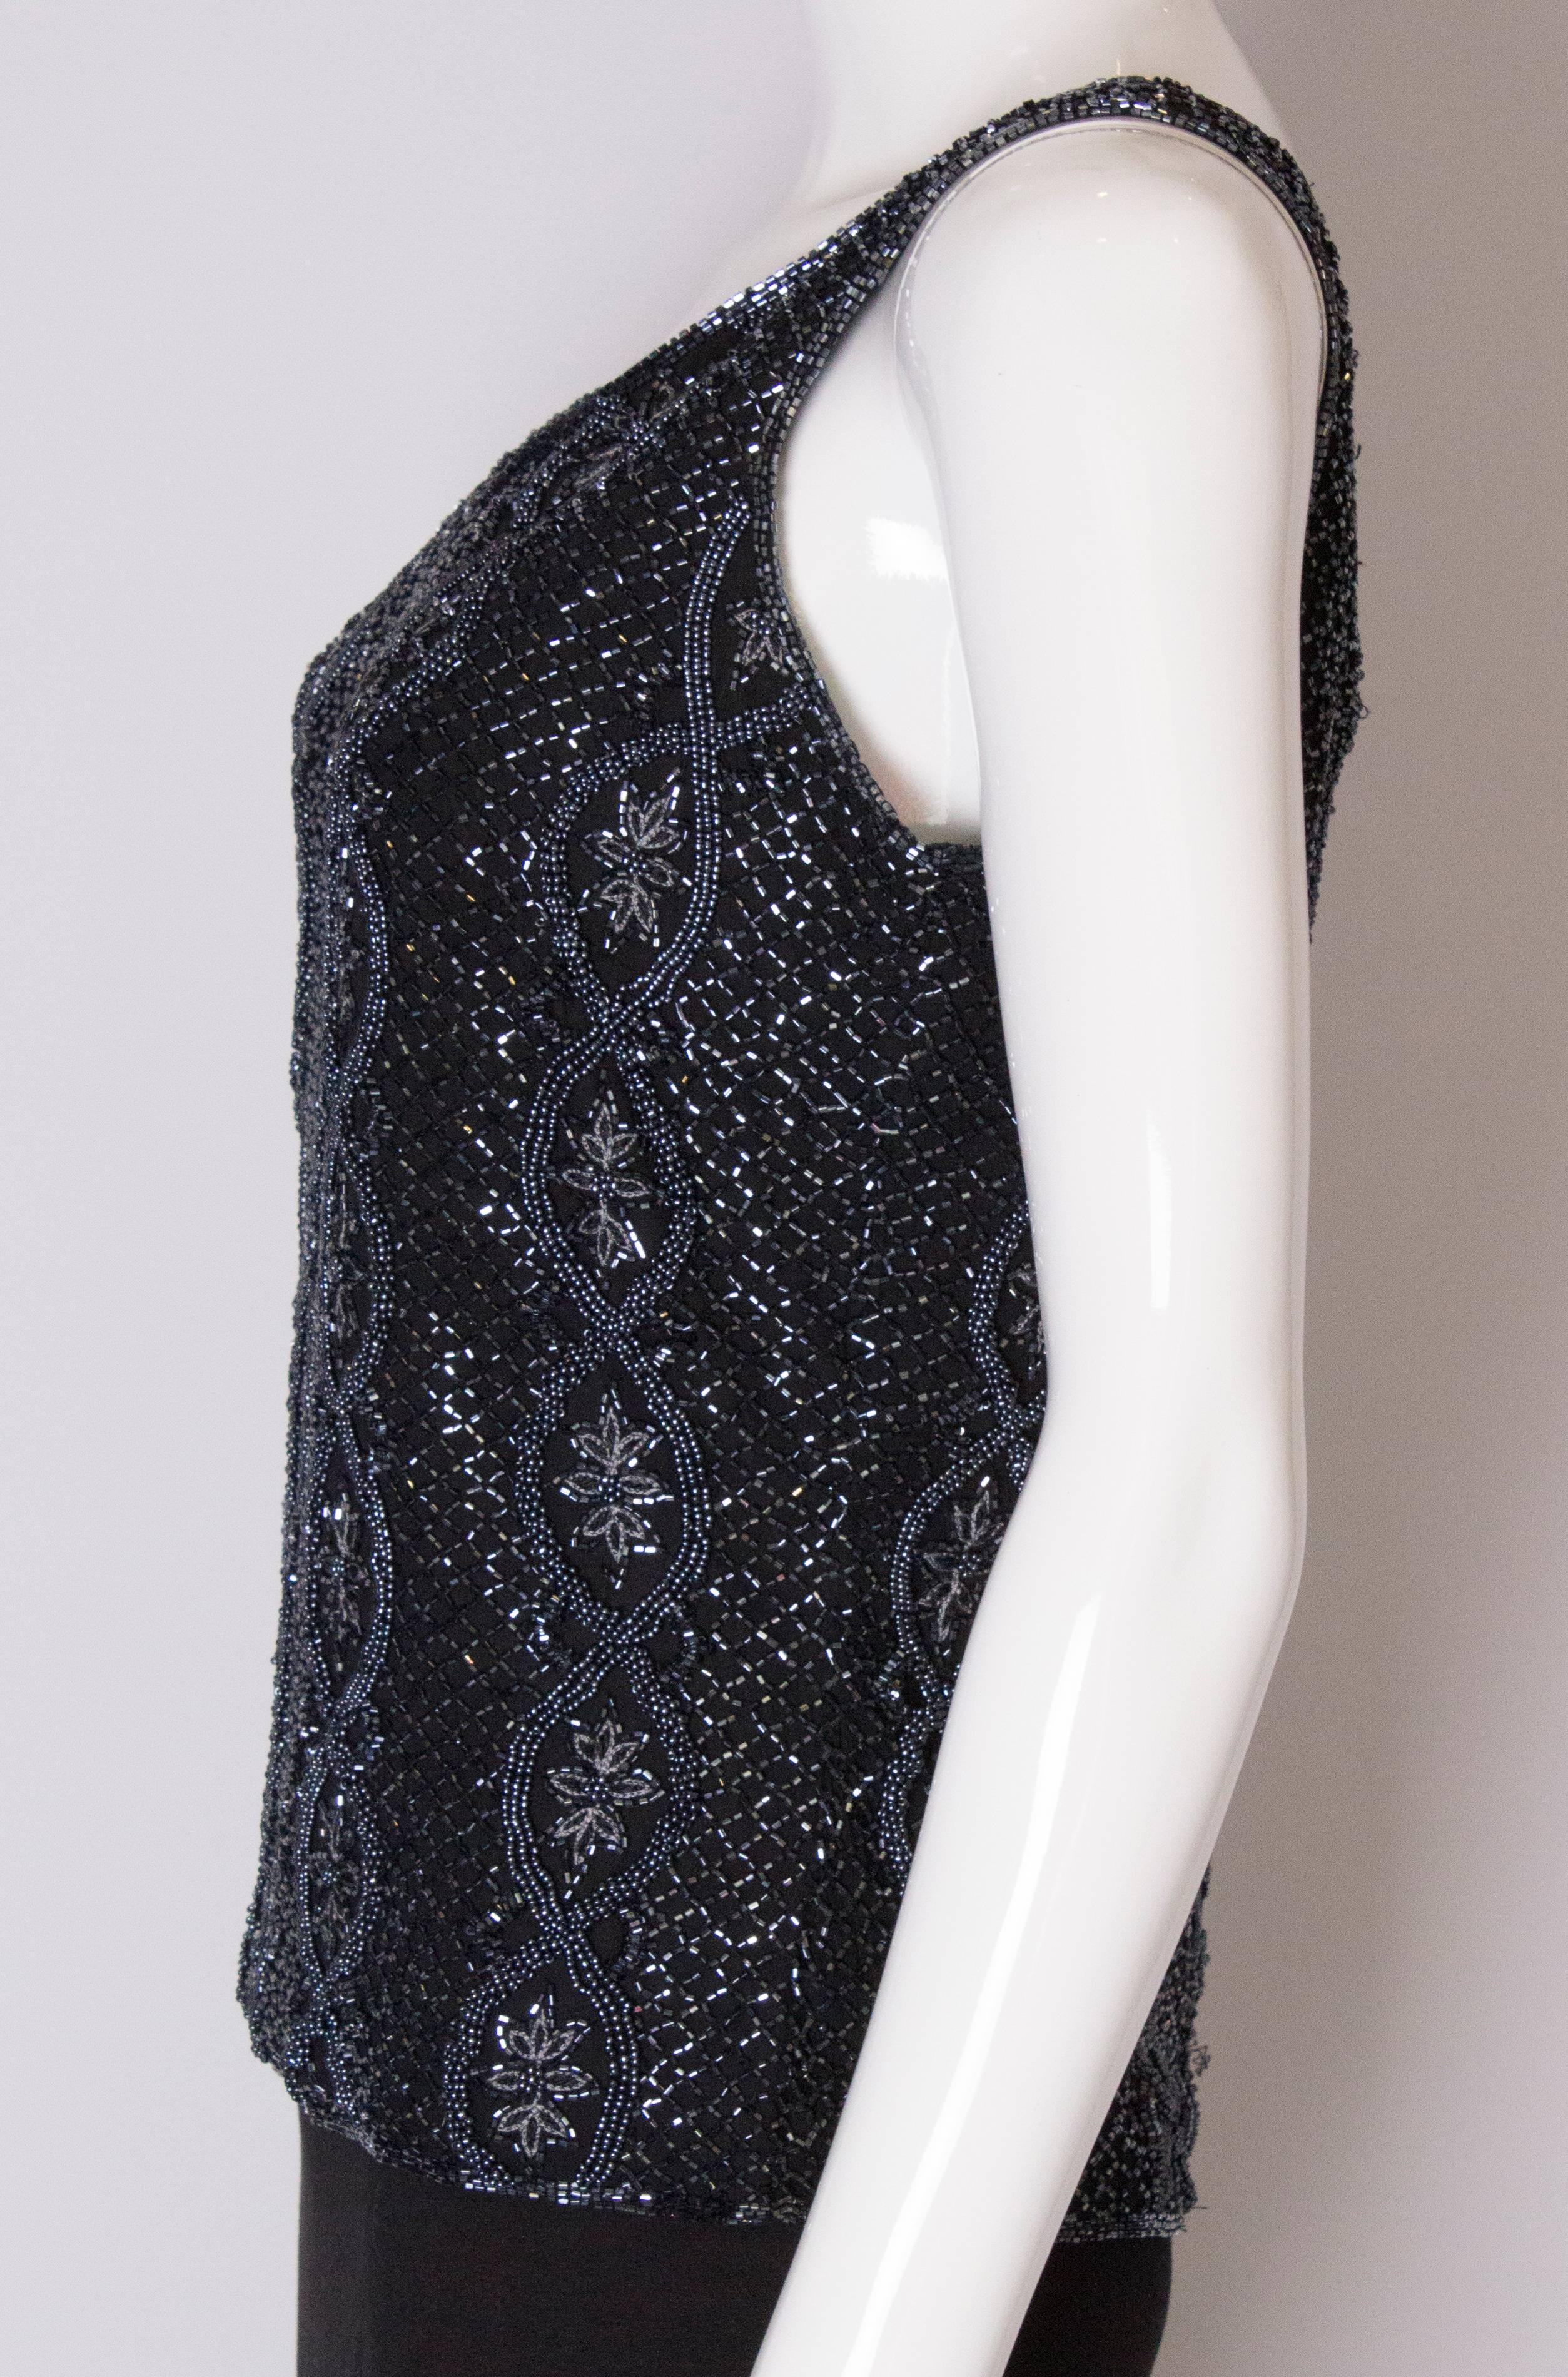 A Vintage 1980s black Beaded Evening Top by Adrianna Papelle In Good Condition For Sale In London, GB